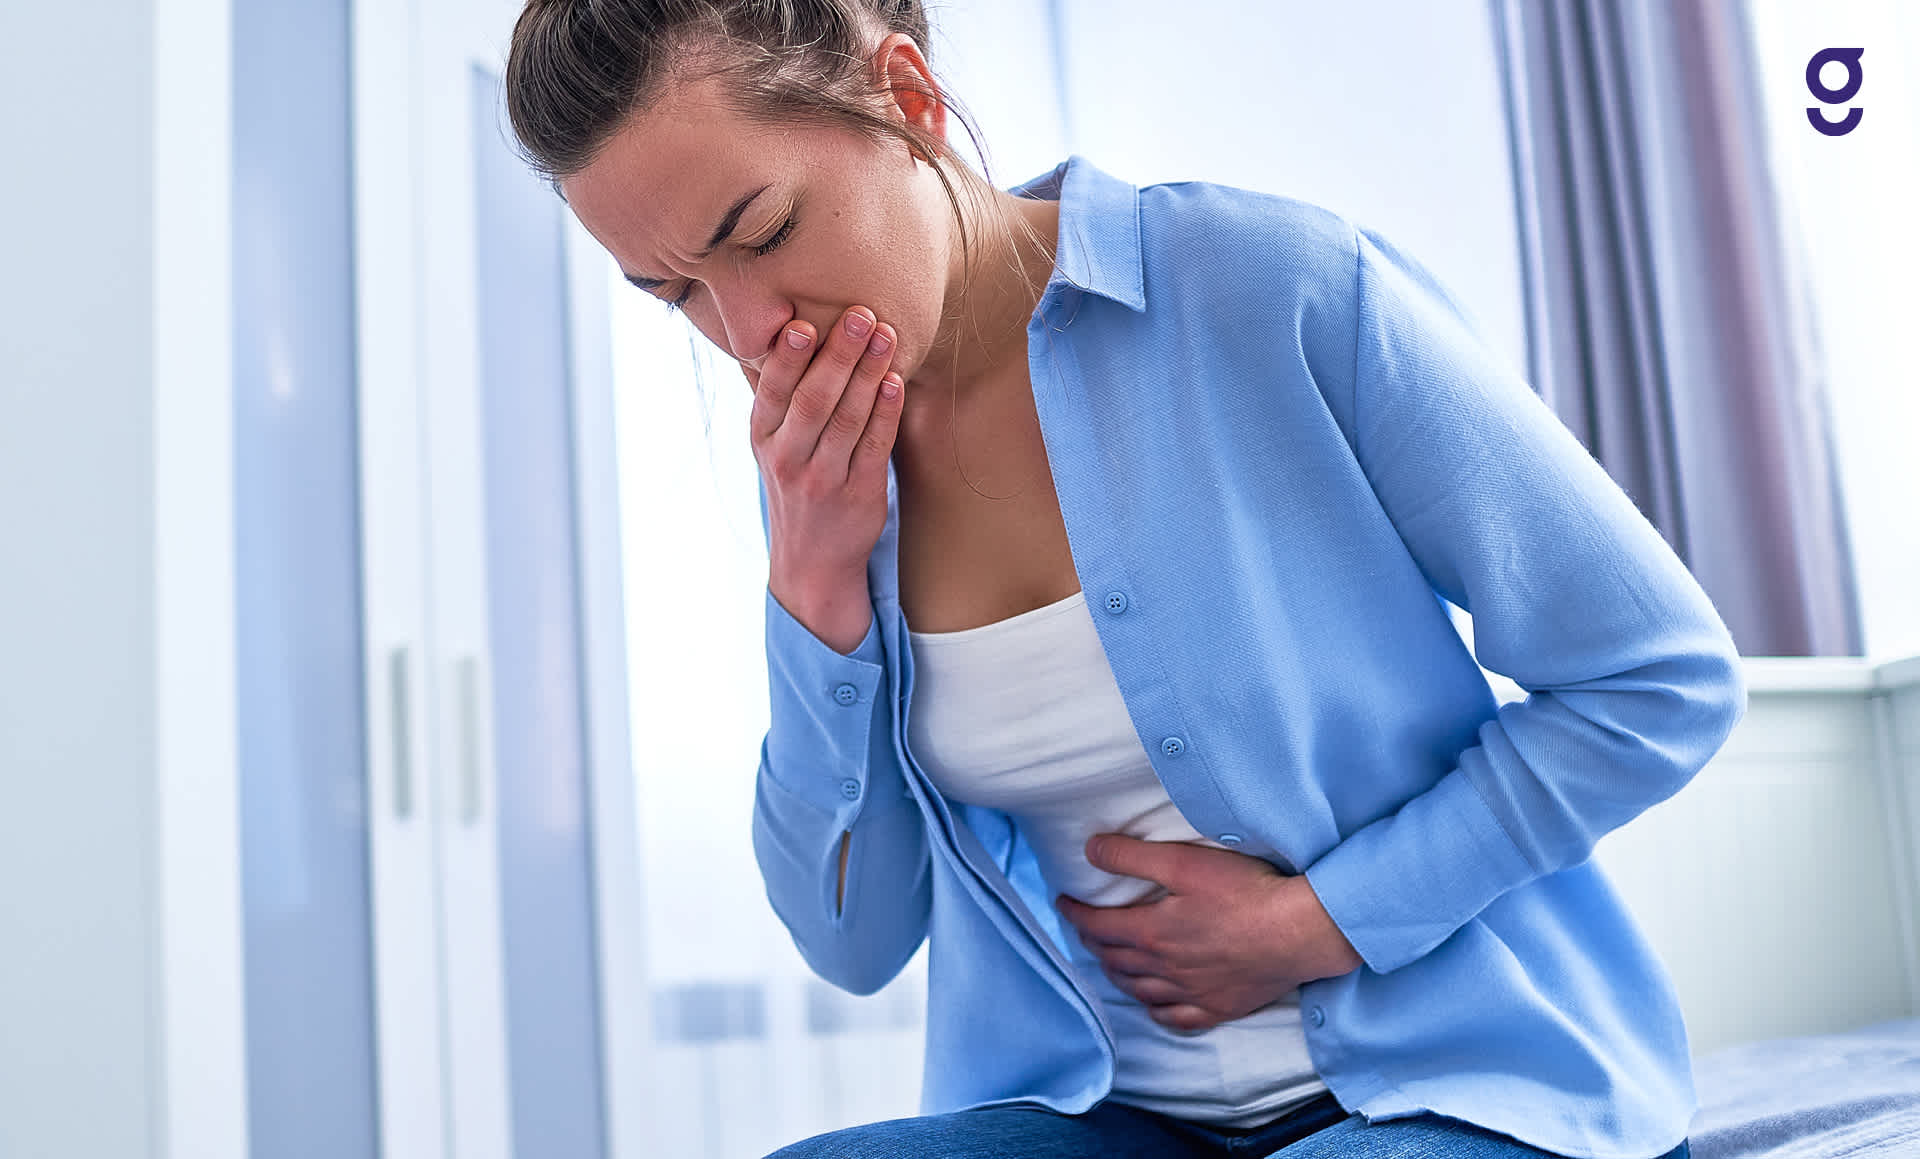 Can You Have Nausea with IBS?